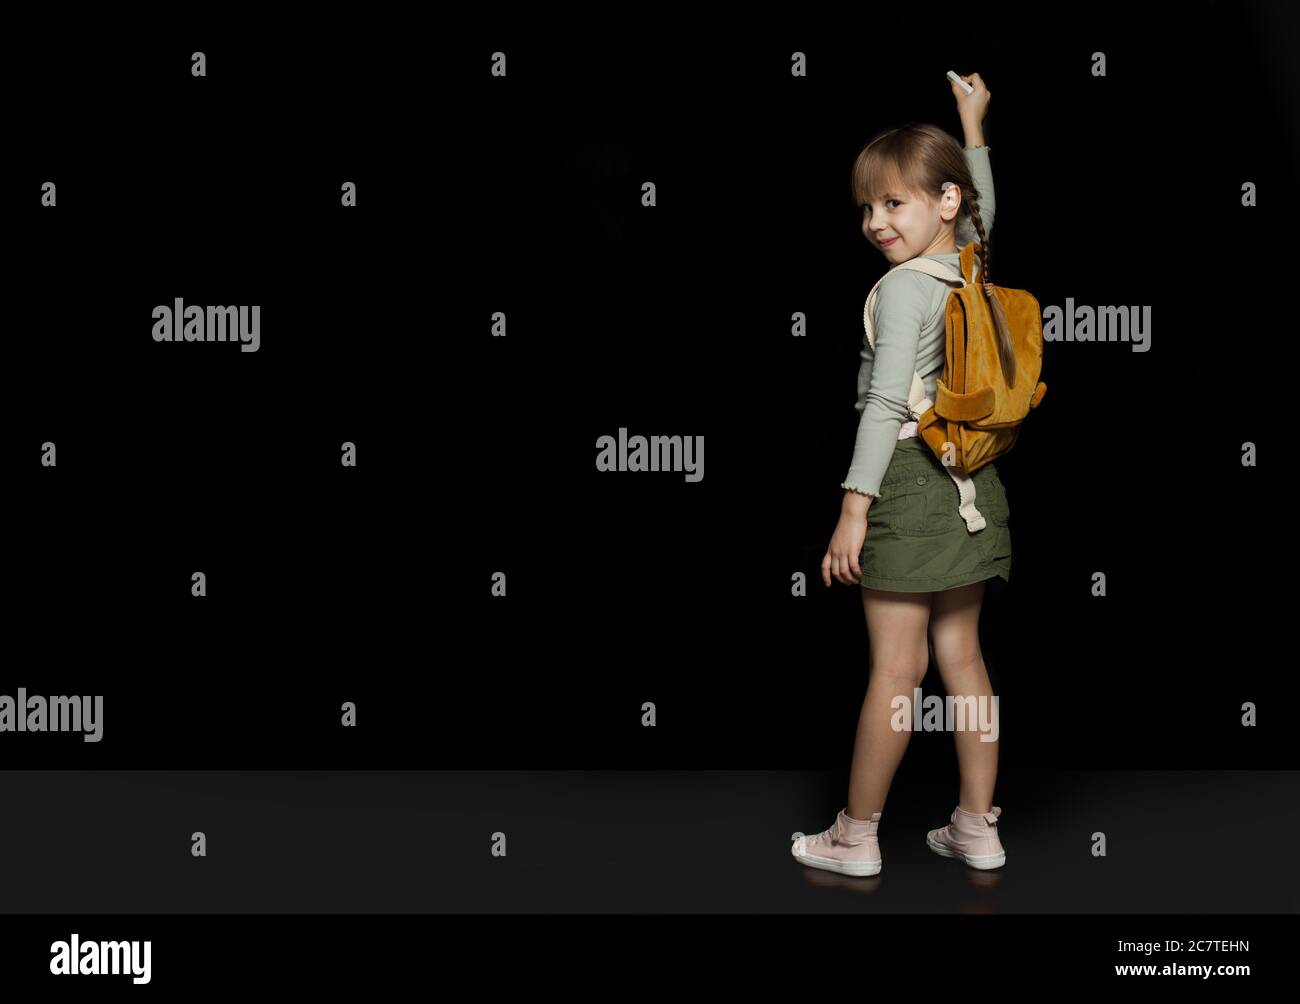 Curious child girl drawing with chalk on blackboard background Stock Photo